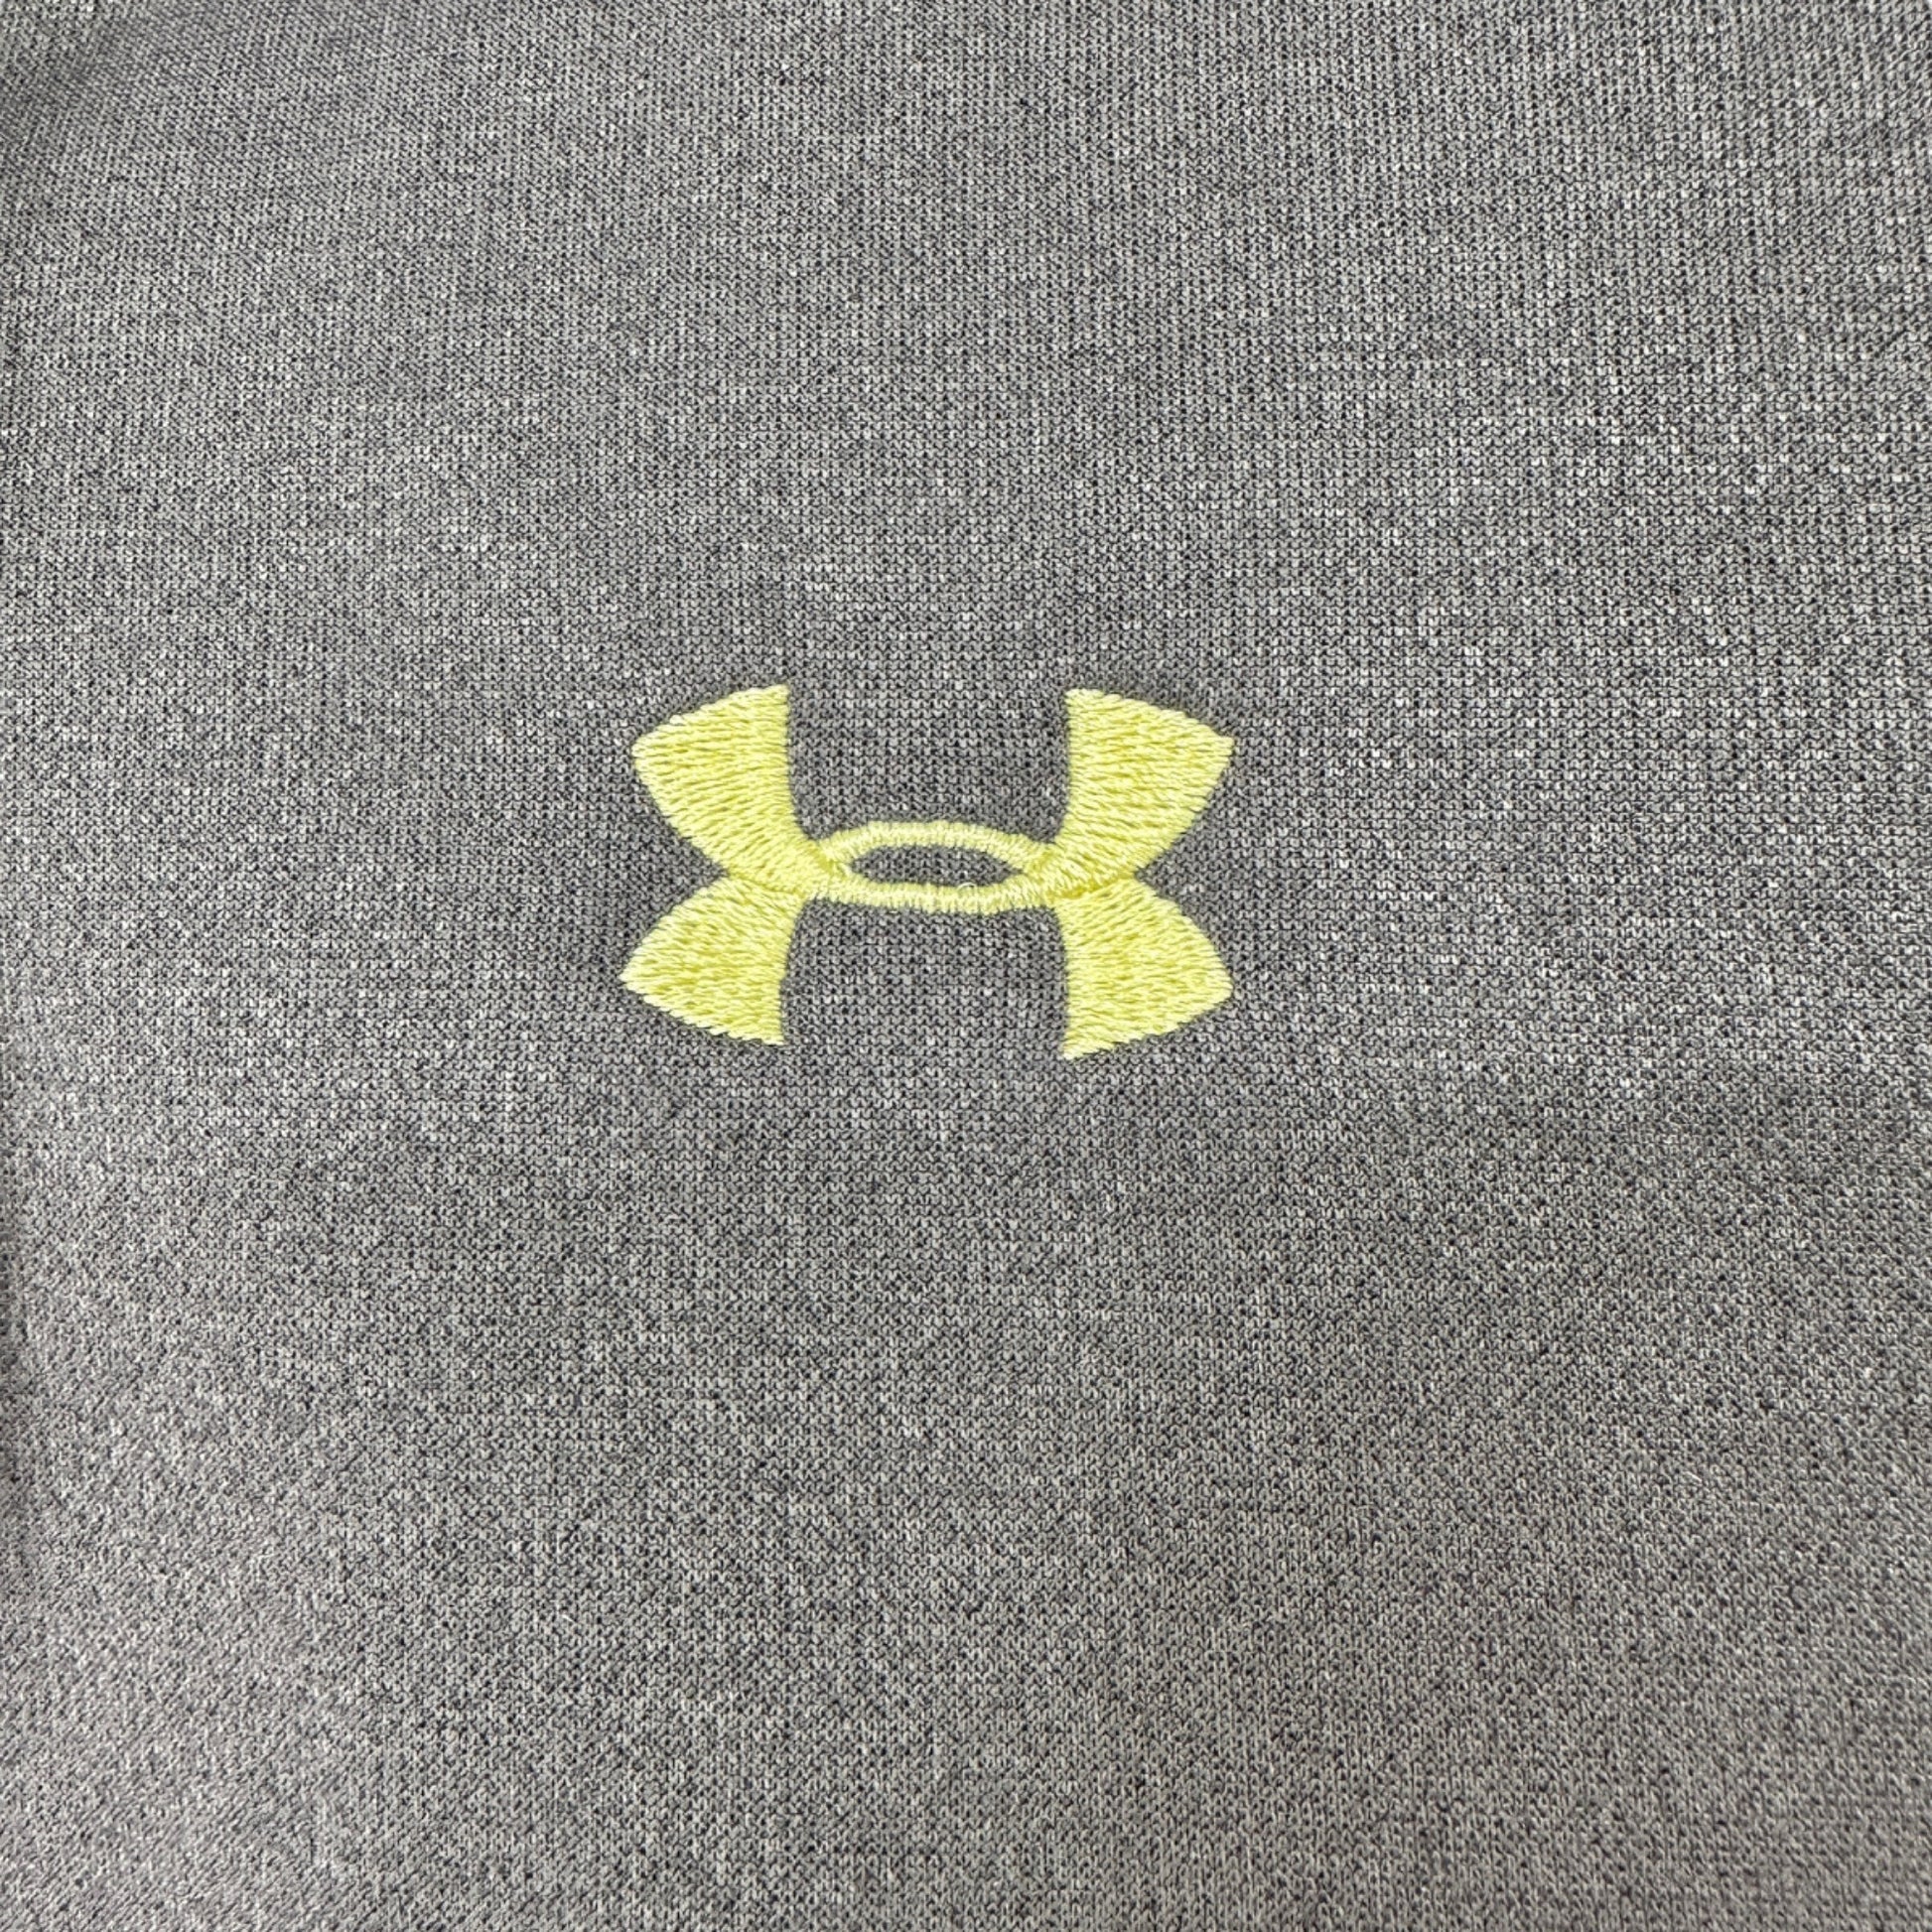 Under Armour Large Compression Sports Bra Gray and Black